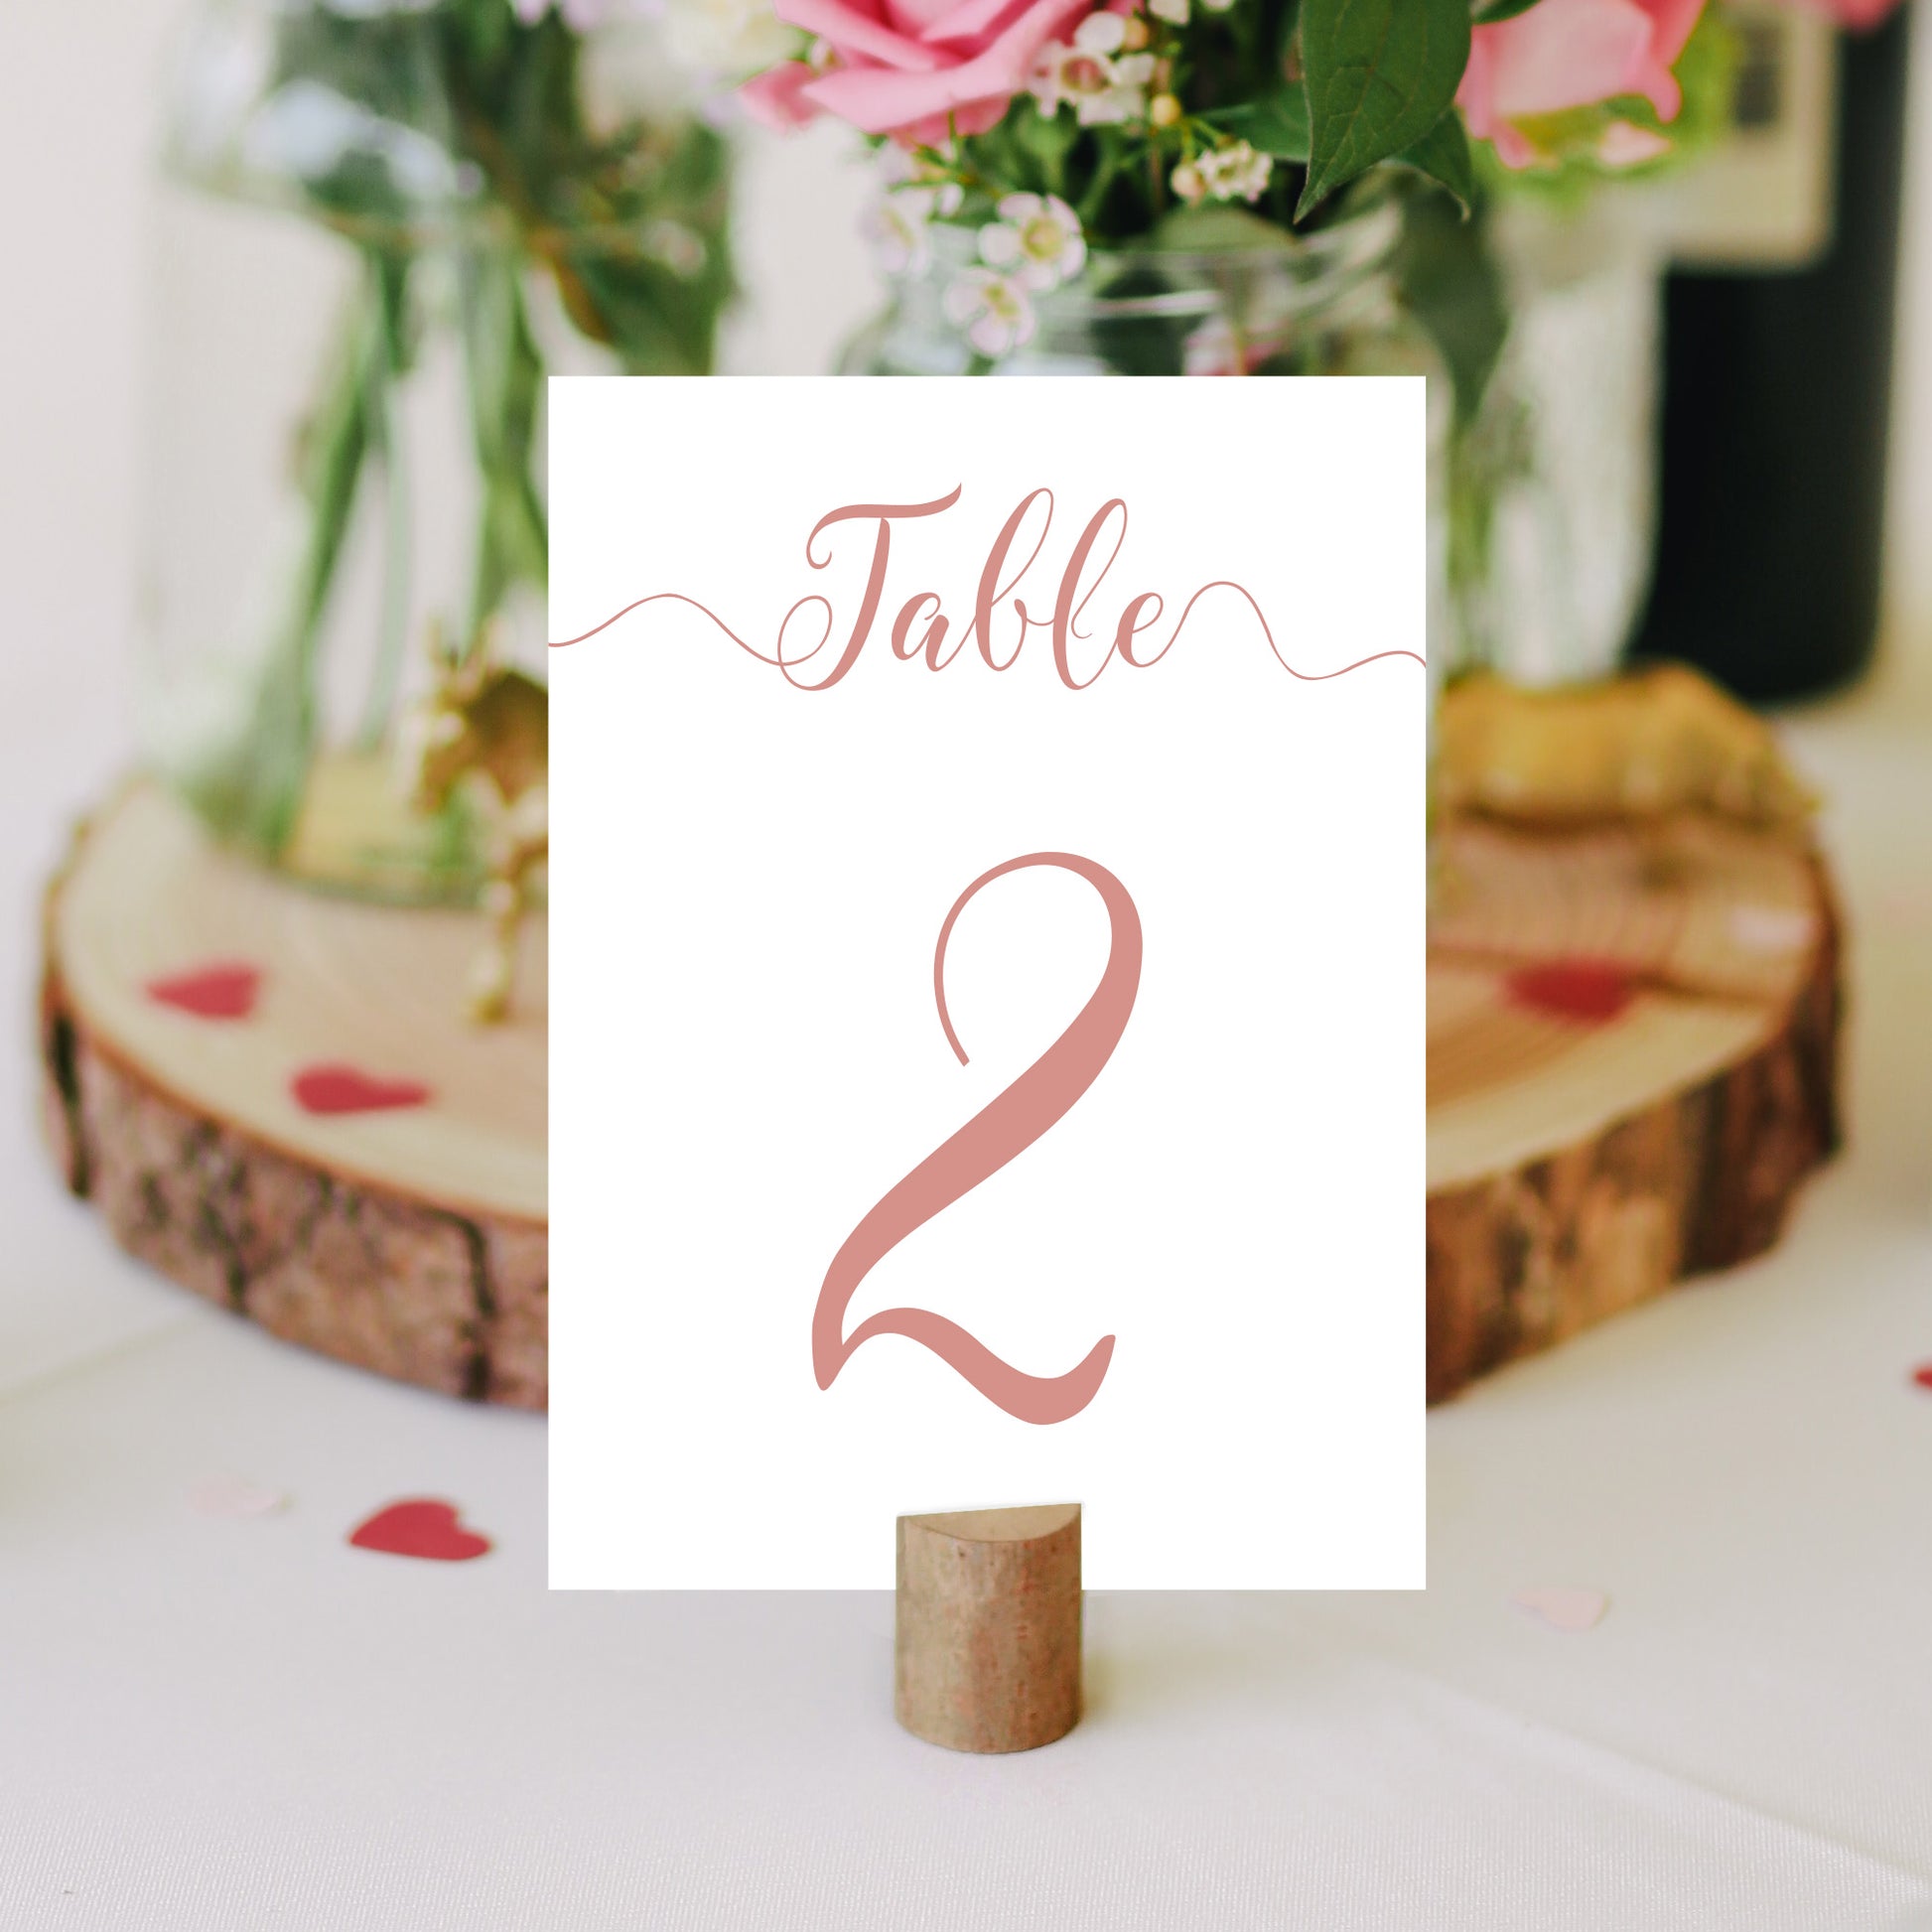 rose gold table number on a wedding table